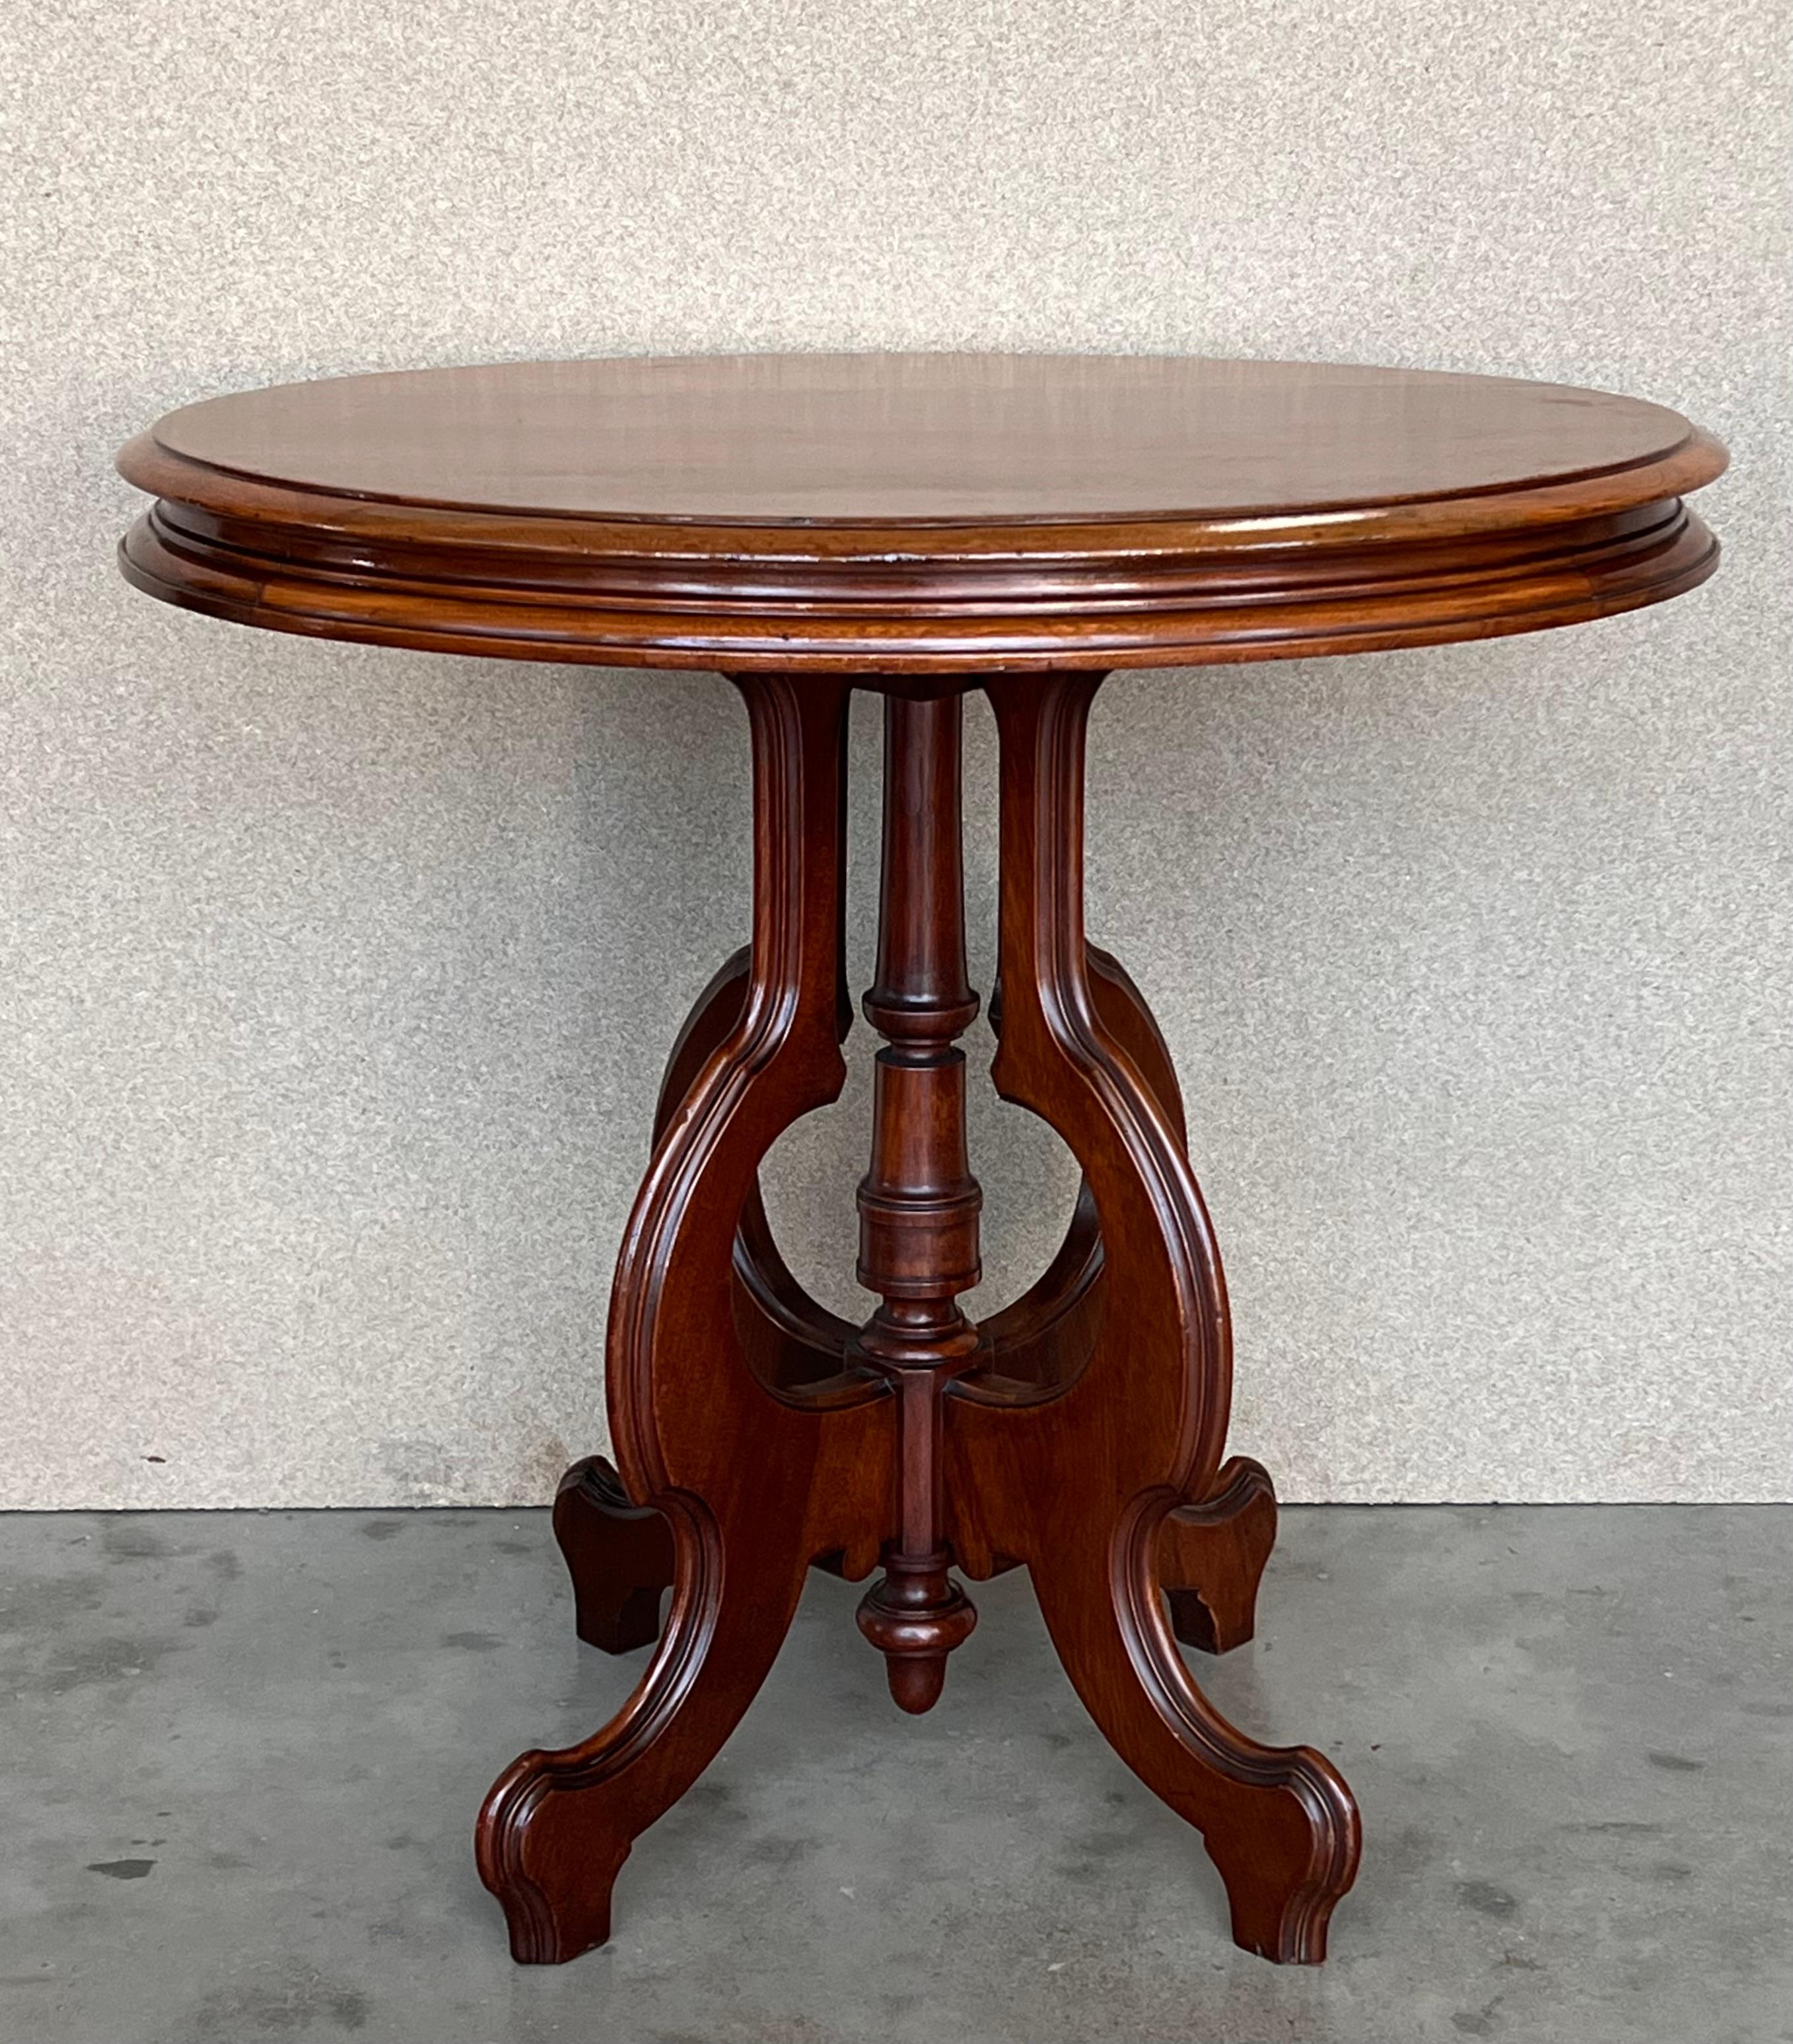 For sale is a good quality Victorian burr walnut oval coffee table, having be leveled top, above a birdcage base, raised on elegantly four curved center legs on pedestal. The table is in very good condition for its age.